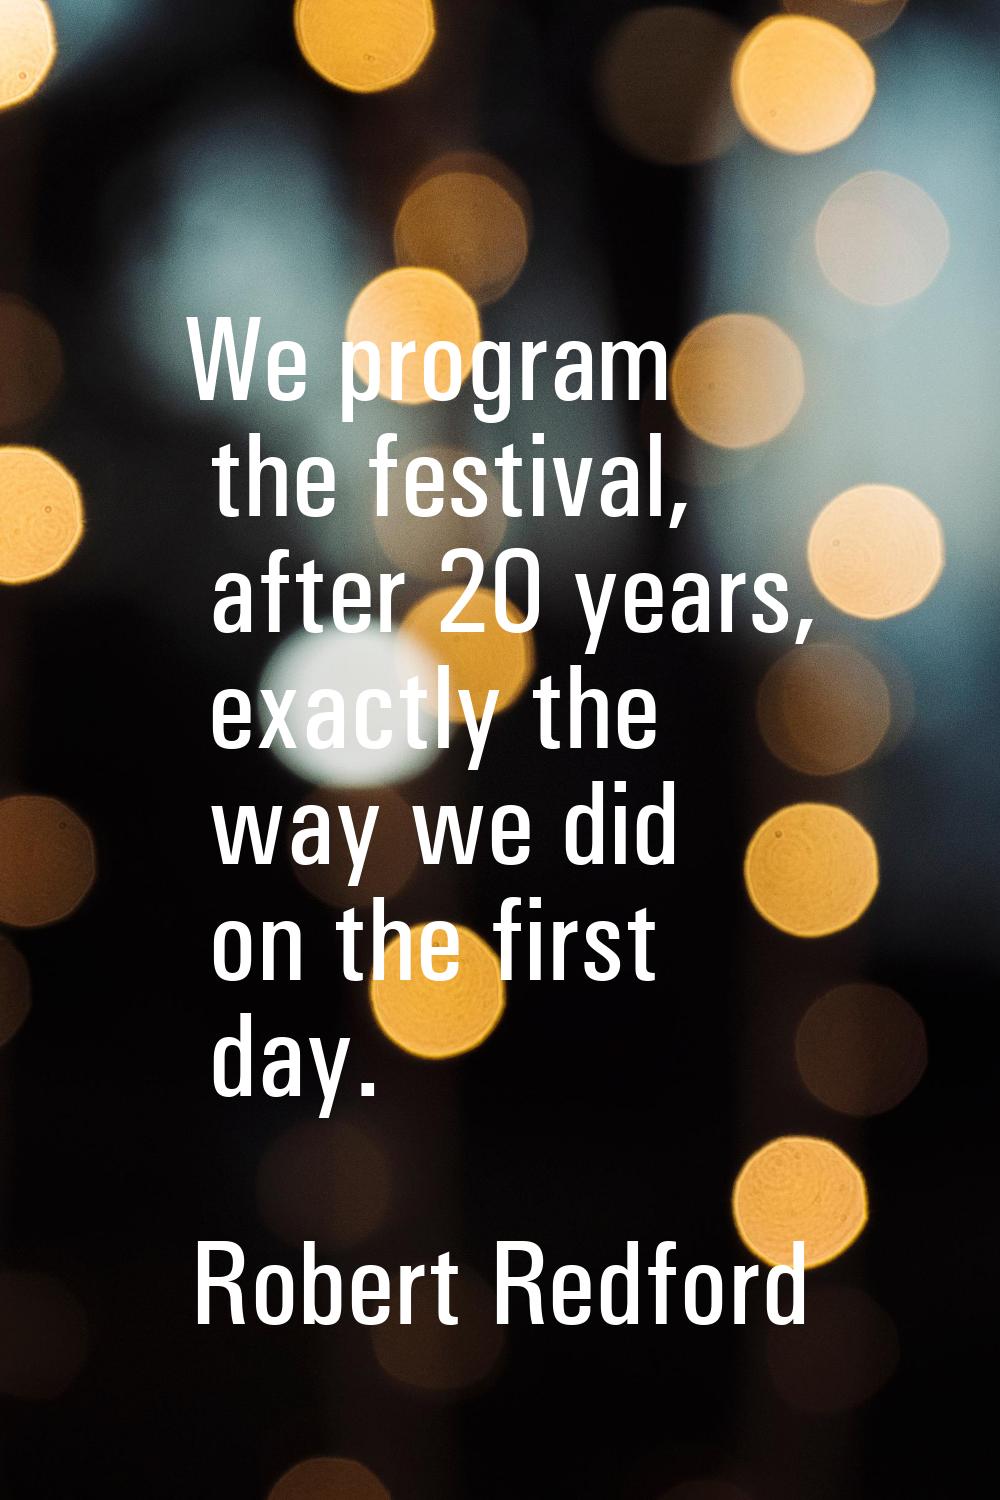 We program the festival, after 20 years, exactly the way we did on the first day.